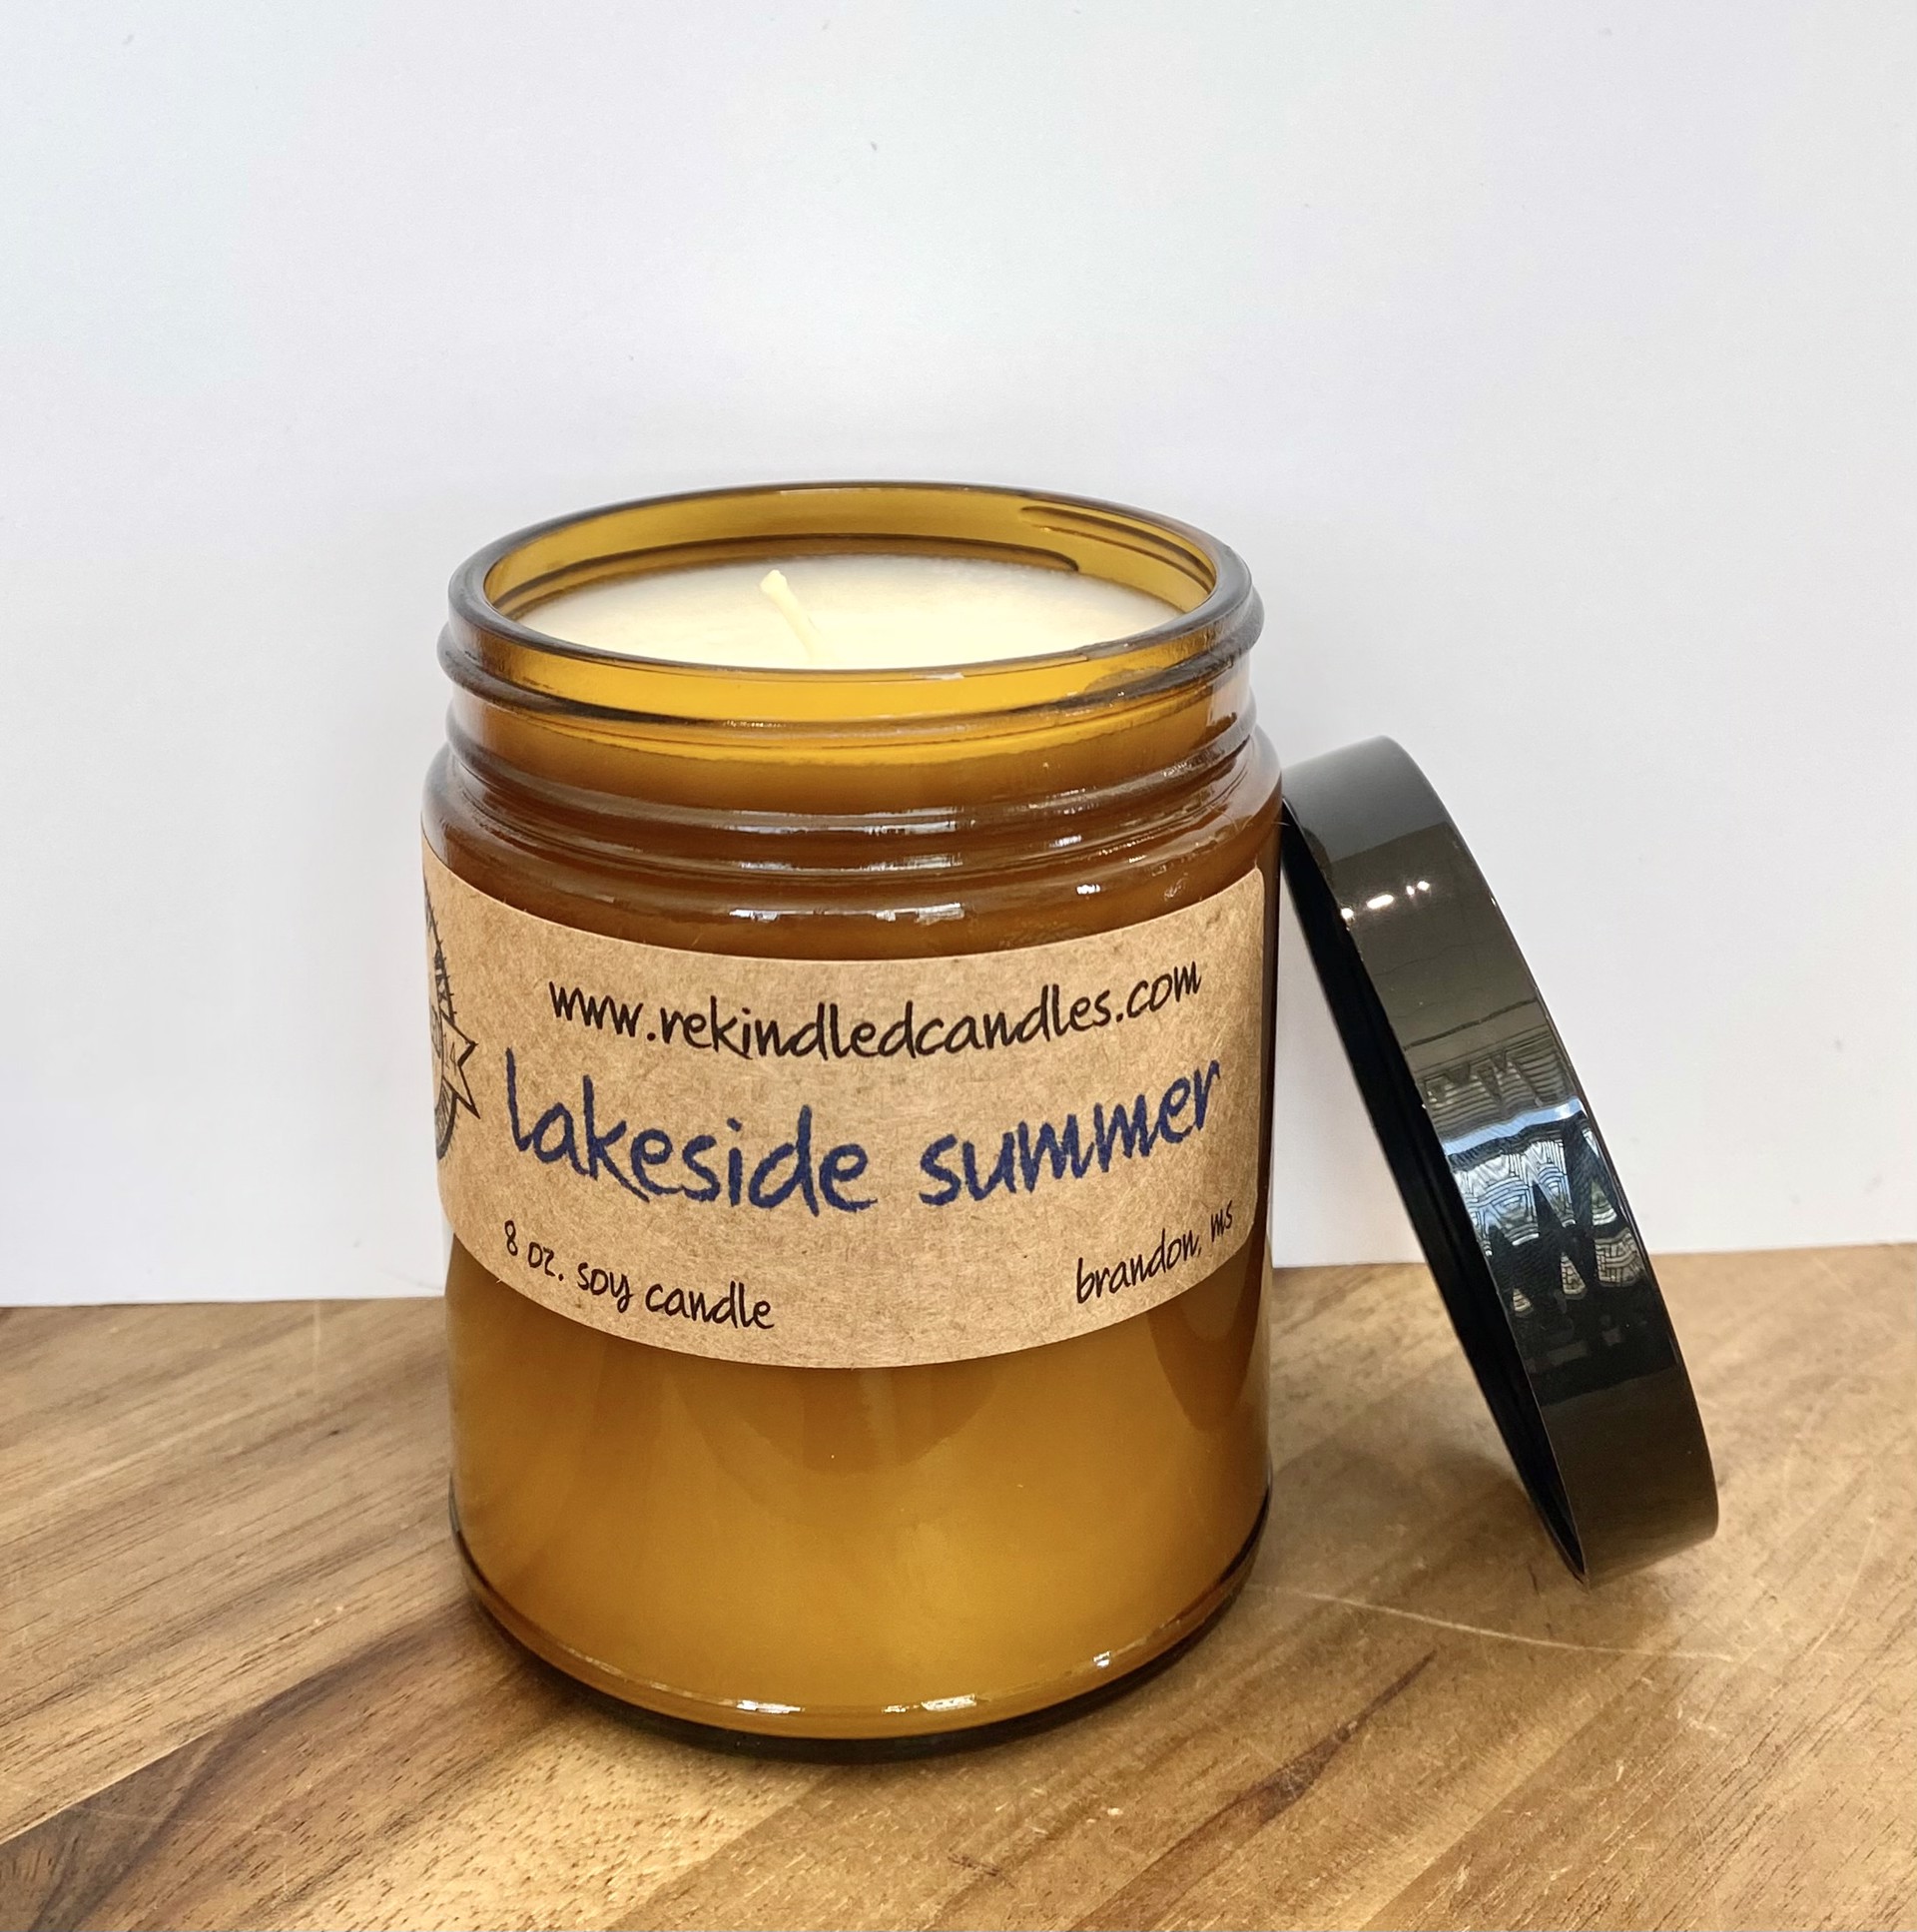 Lakeside Summer Amber Jar Candle by re-kindled candle company